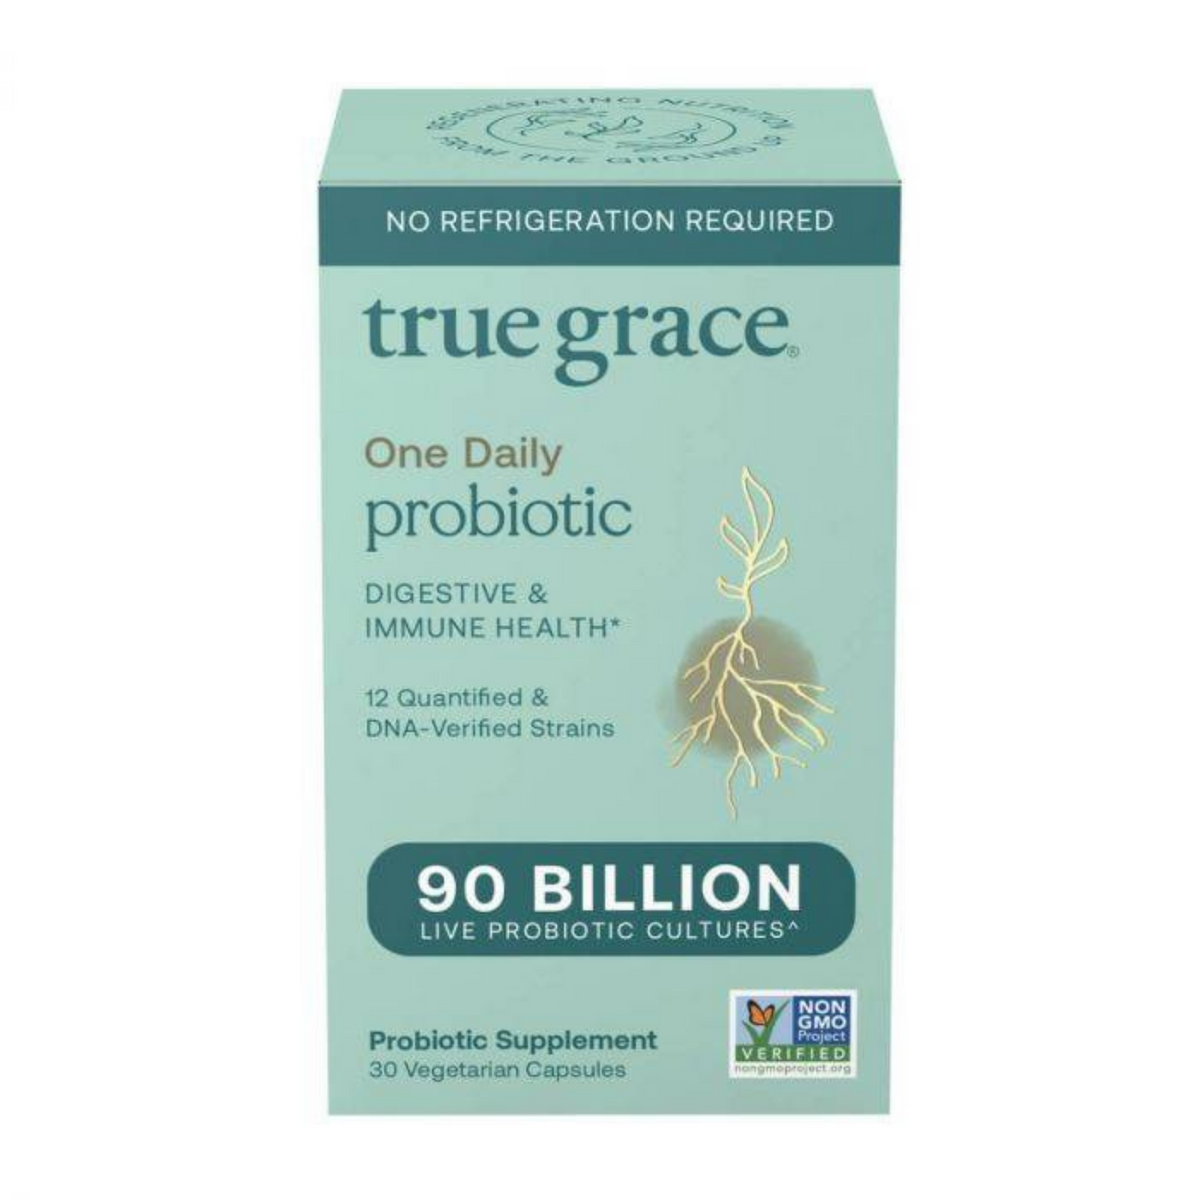 True Grace One Daily Probiotic (30 count) #10084691